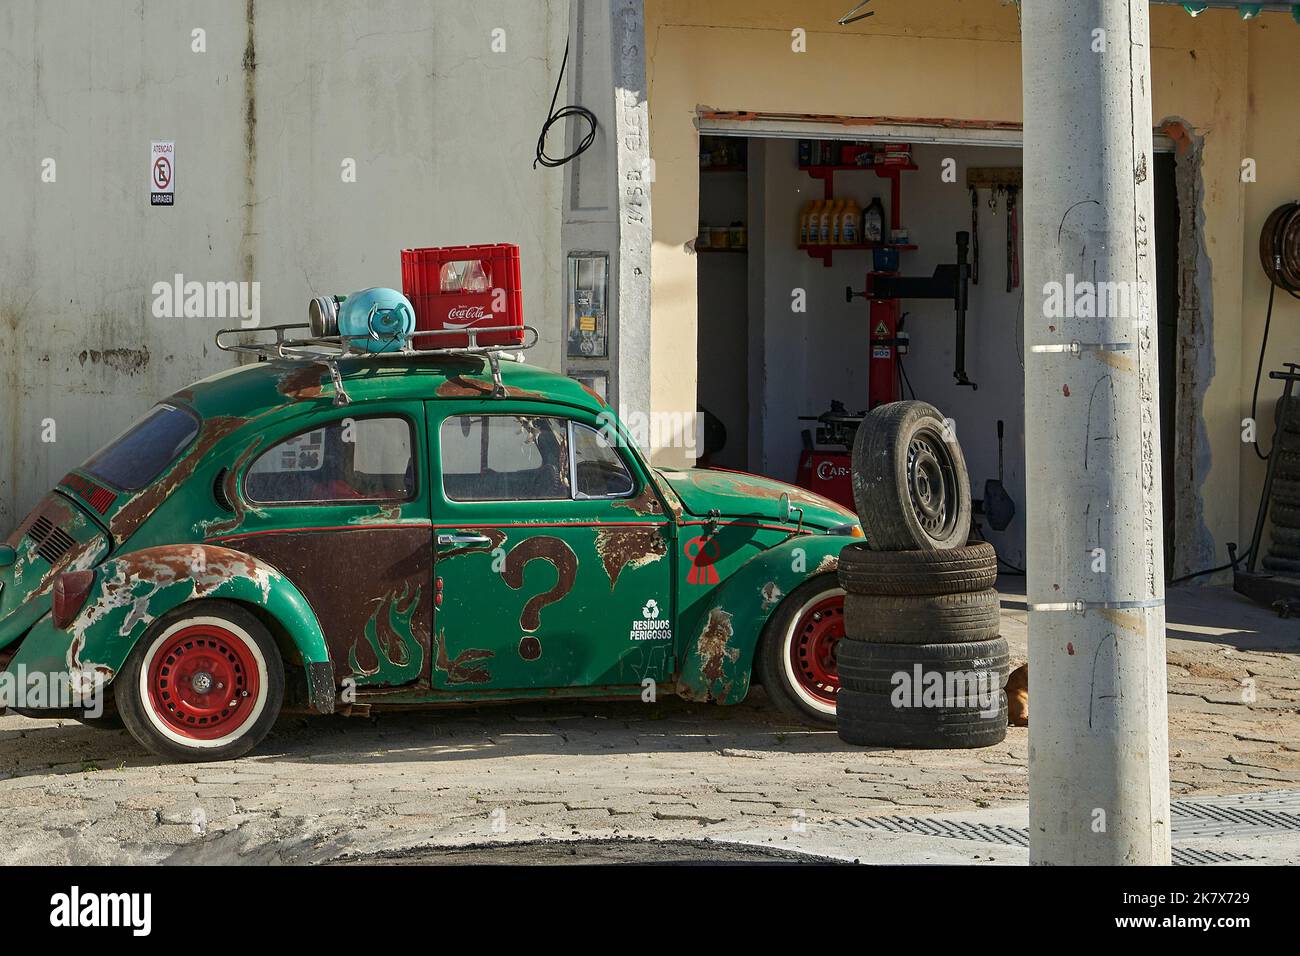 old classic historical Volkswagen vintage beetle whit whitewall tires and rust on the body Stock Photo